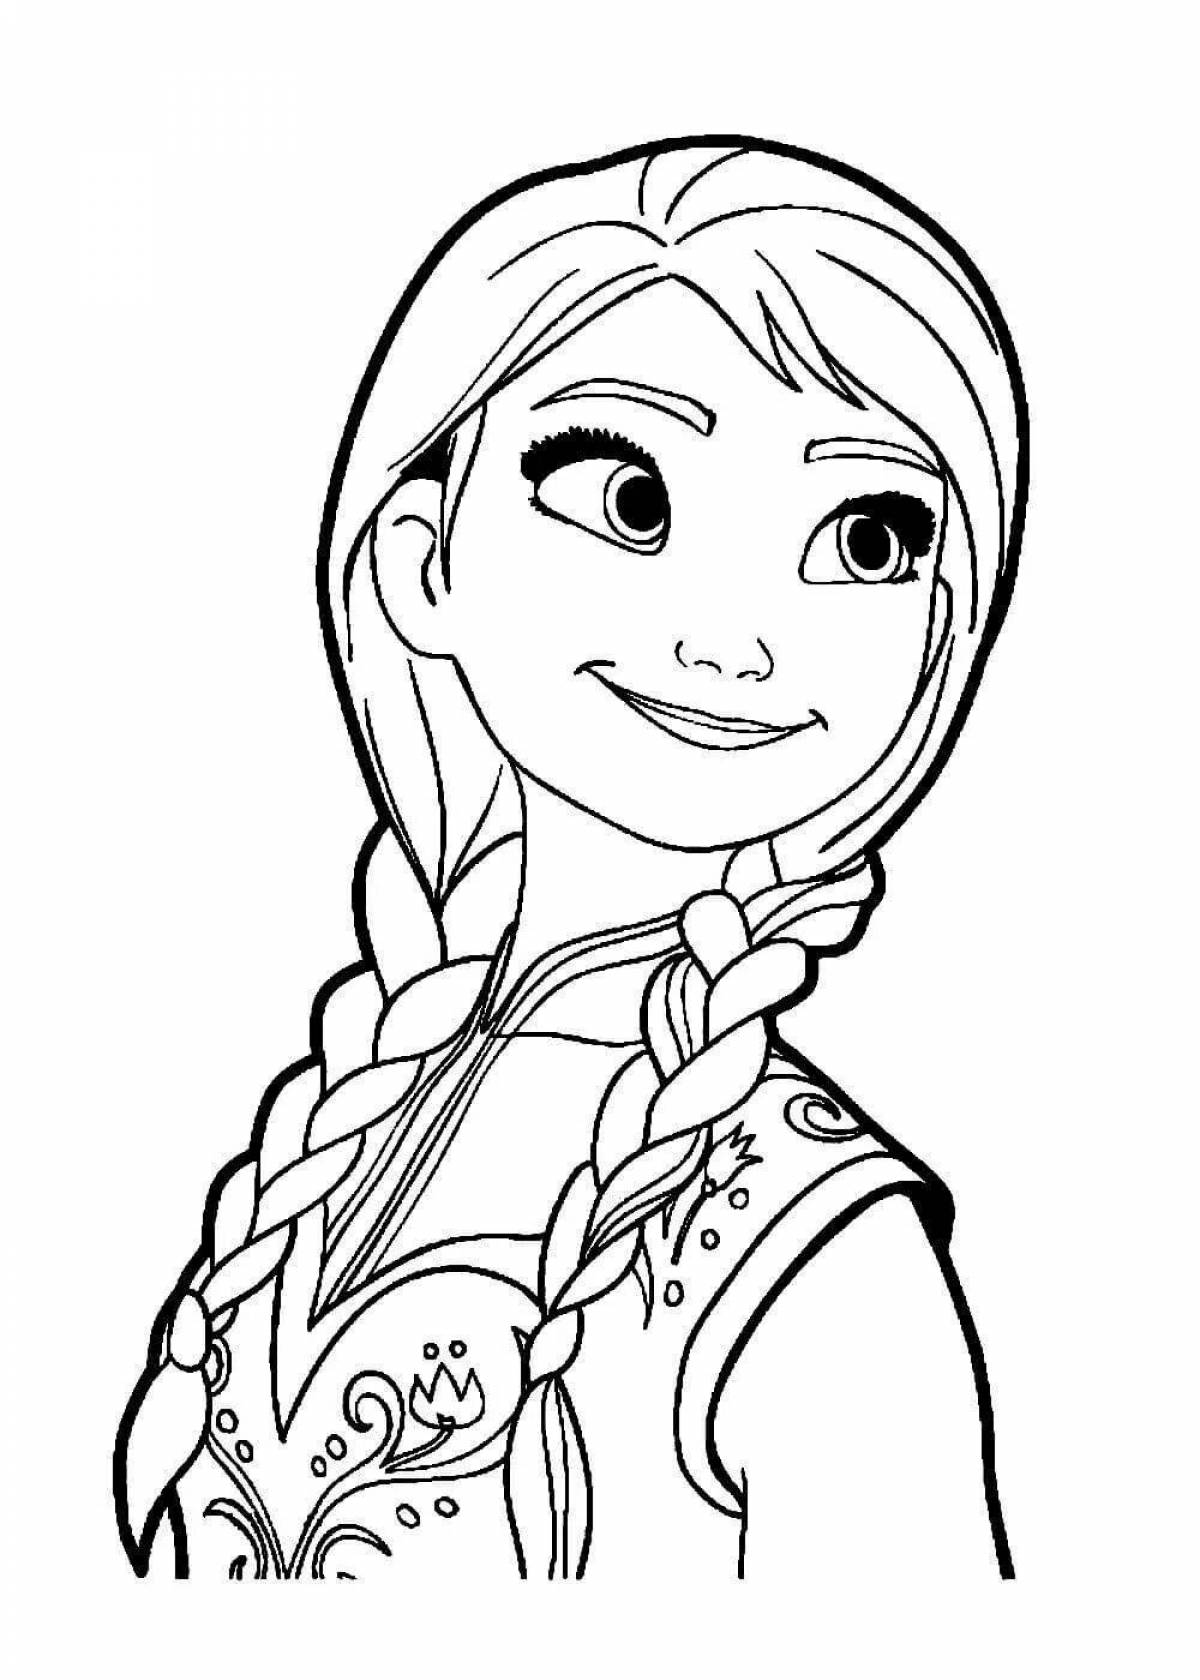 Elsa and Anna exotic coloring book